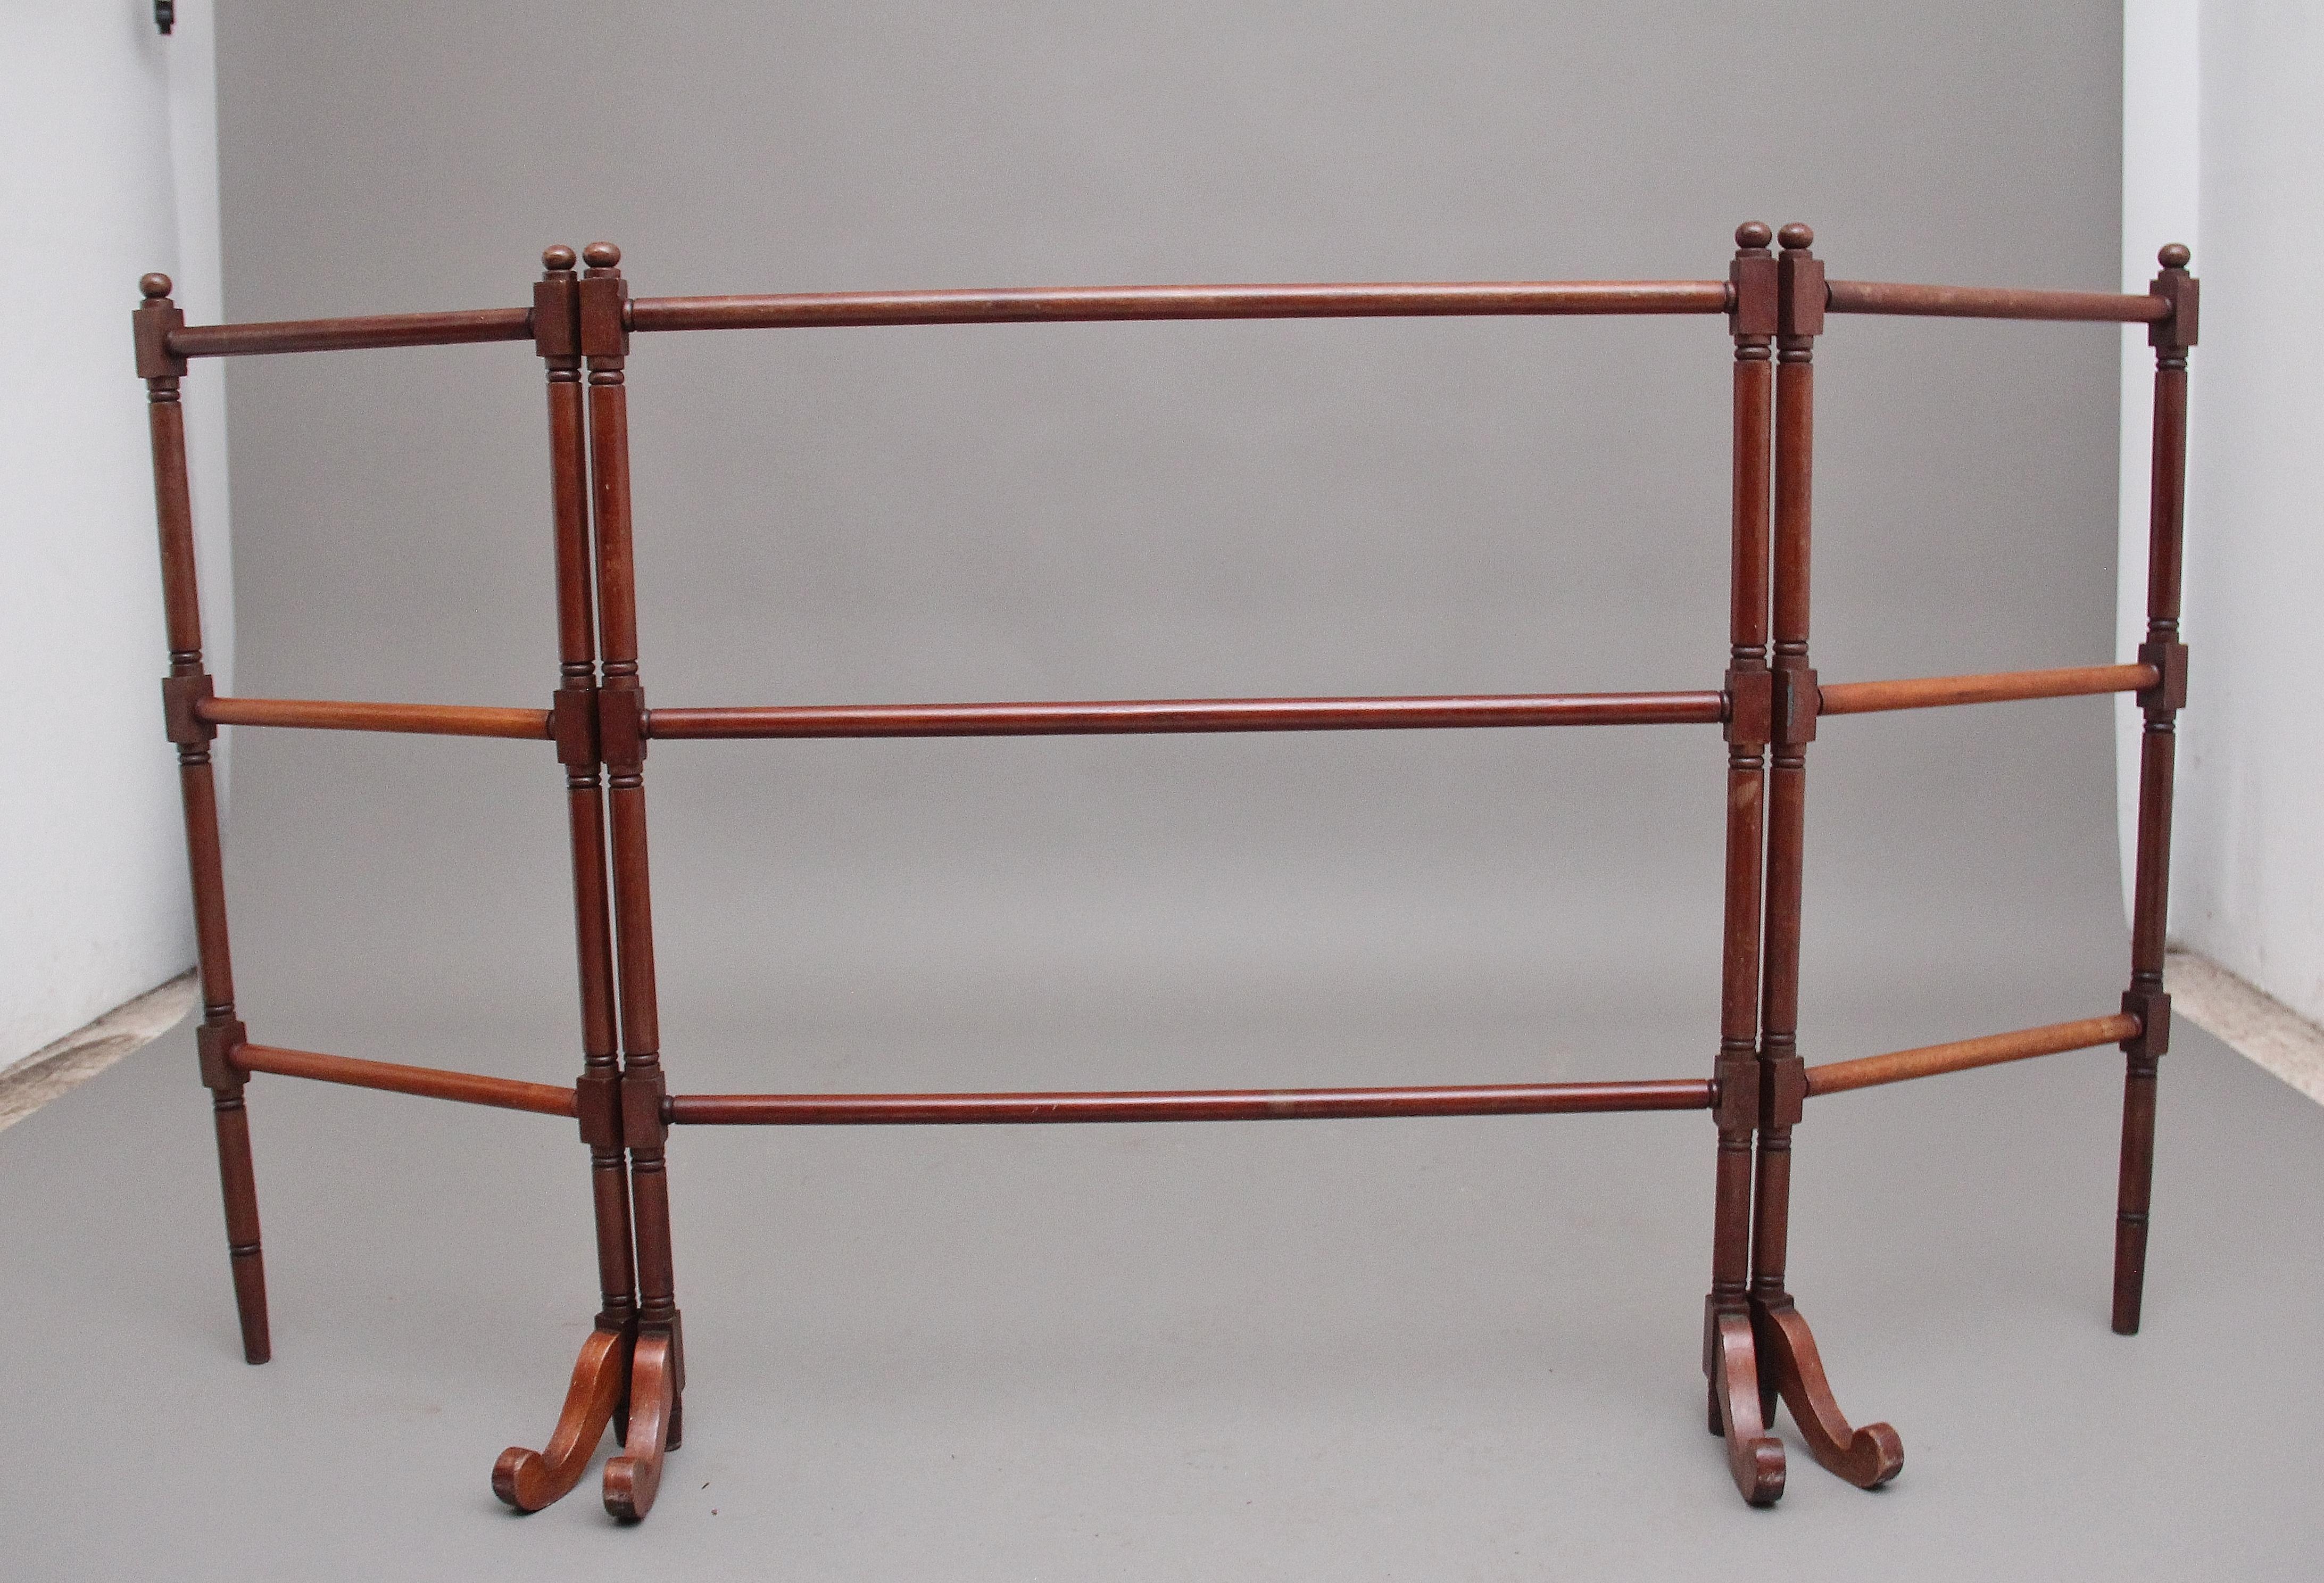 19th century mahogany folding towel rail made up of decorative turned rails and supported on shaped feet, circa 1870.